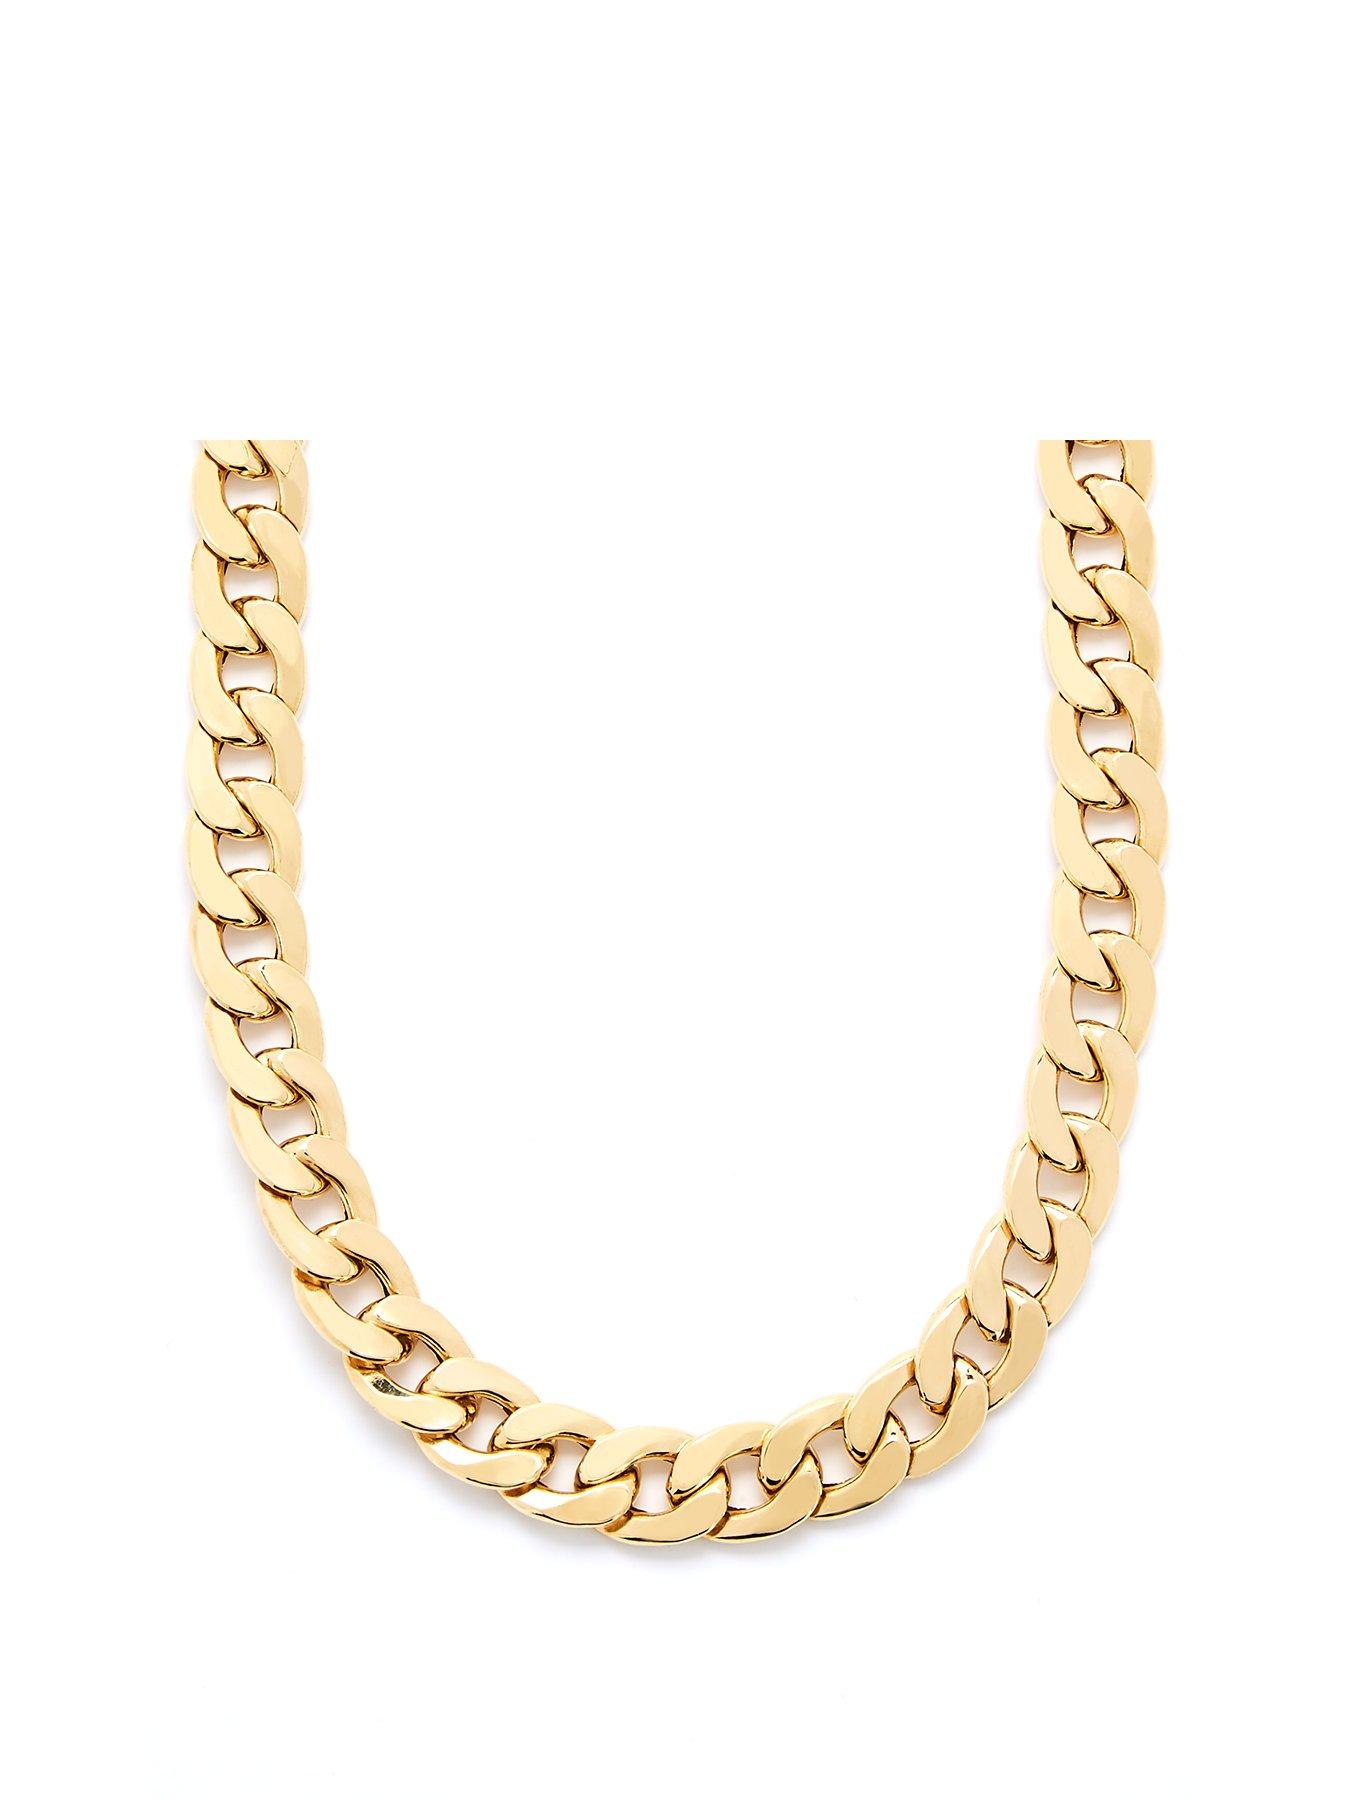  9ct Yellow Gold 1 and 1/2 oz Solid Diamond Cut 20 Inch Curb Chain